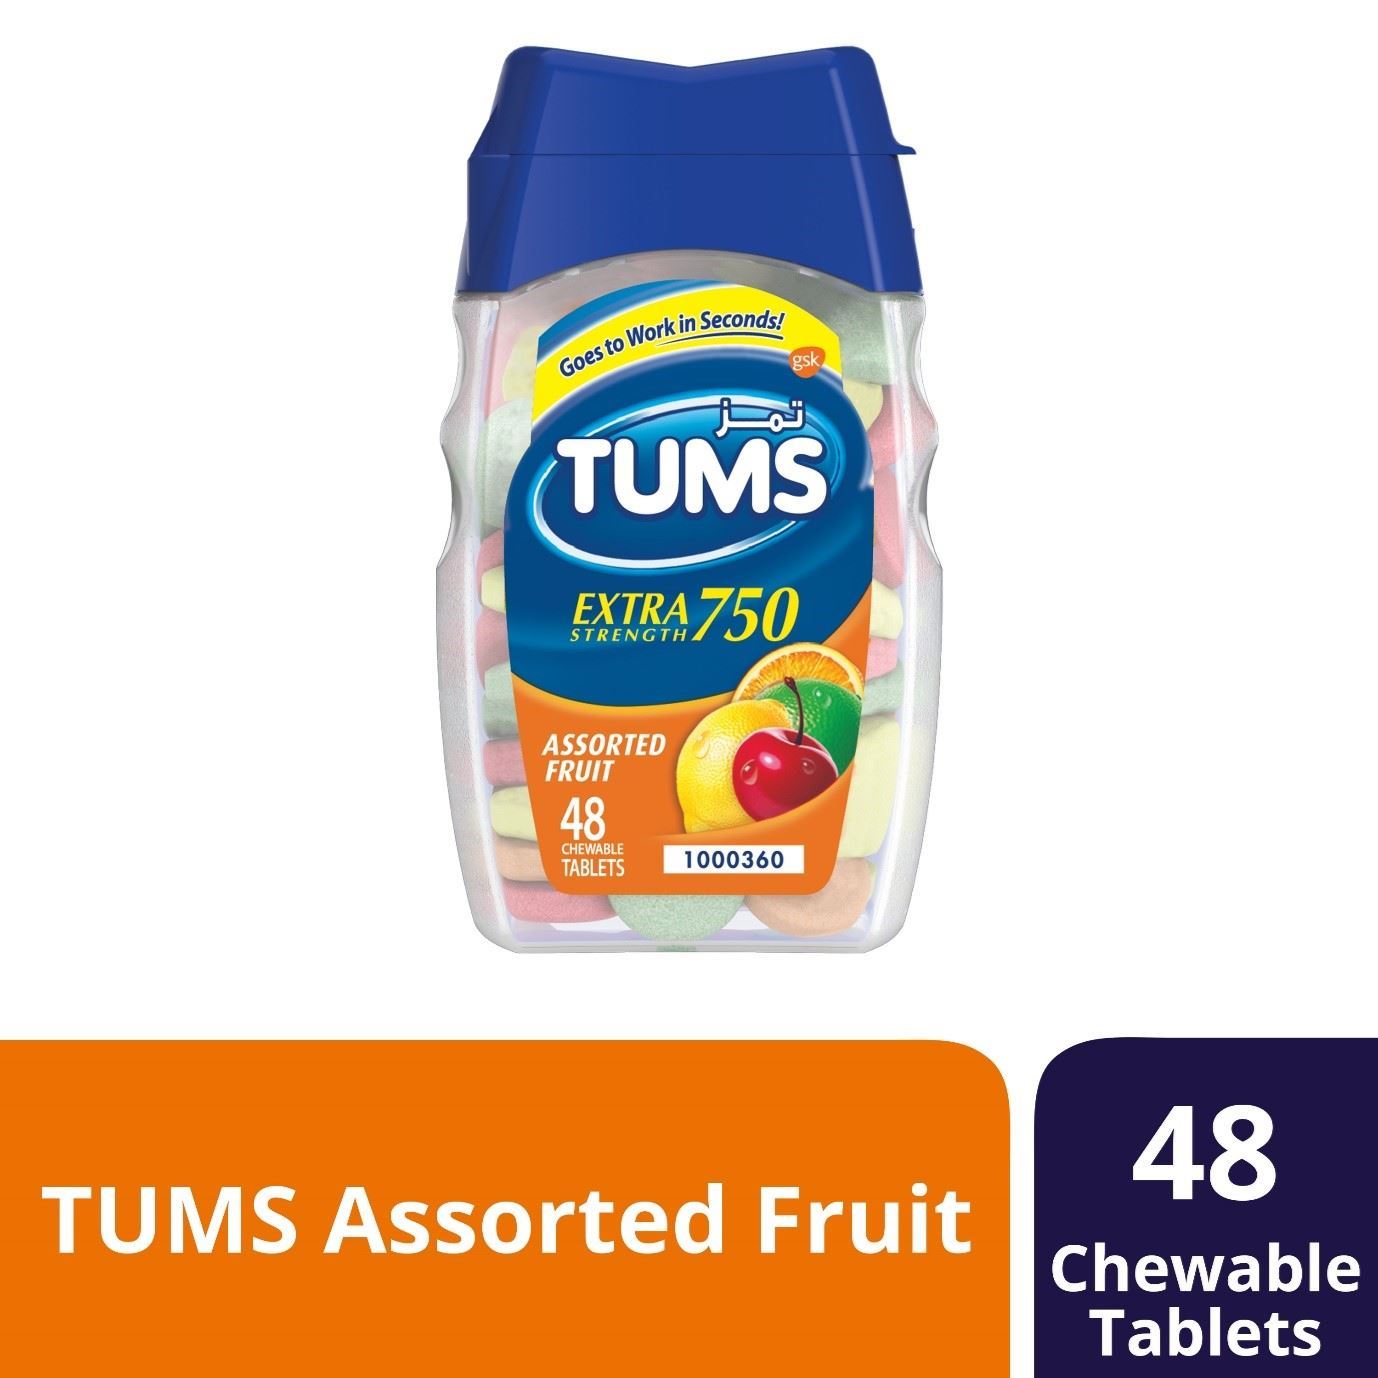 TUMS EXTRA STRENGTH BOTTLE 750 MG 48 CHEWABLE TABLETS